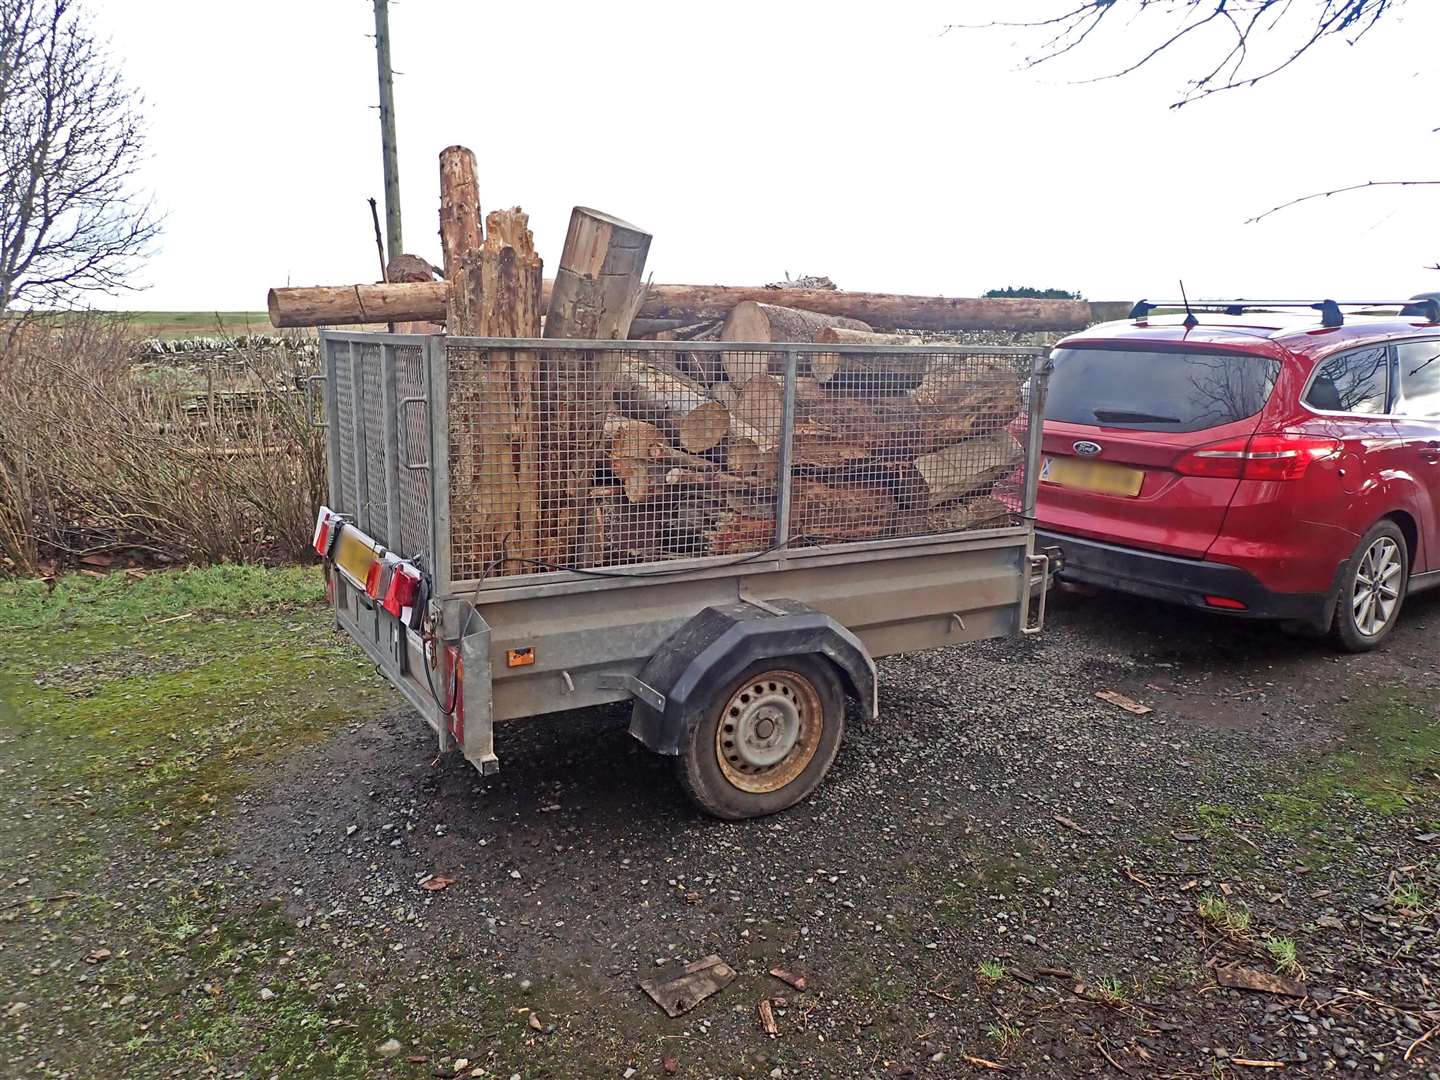 Another trailer-load of firewood.